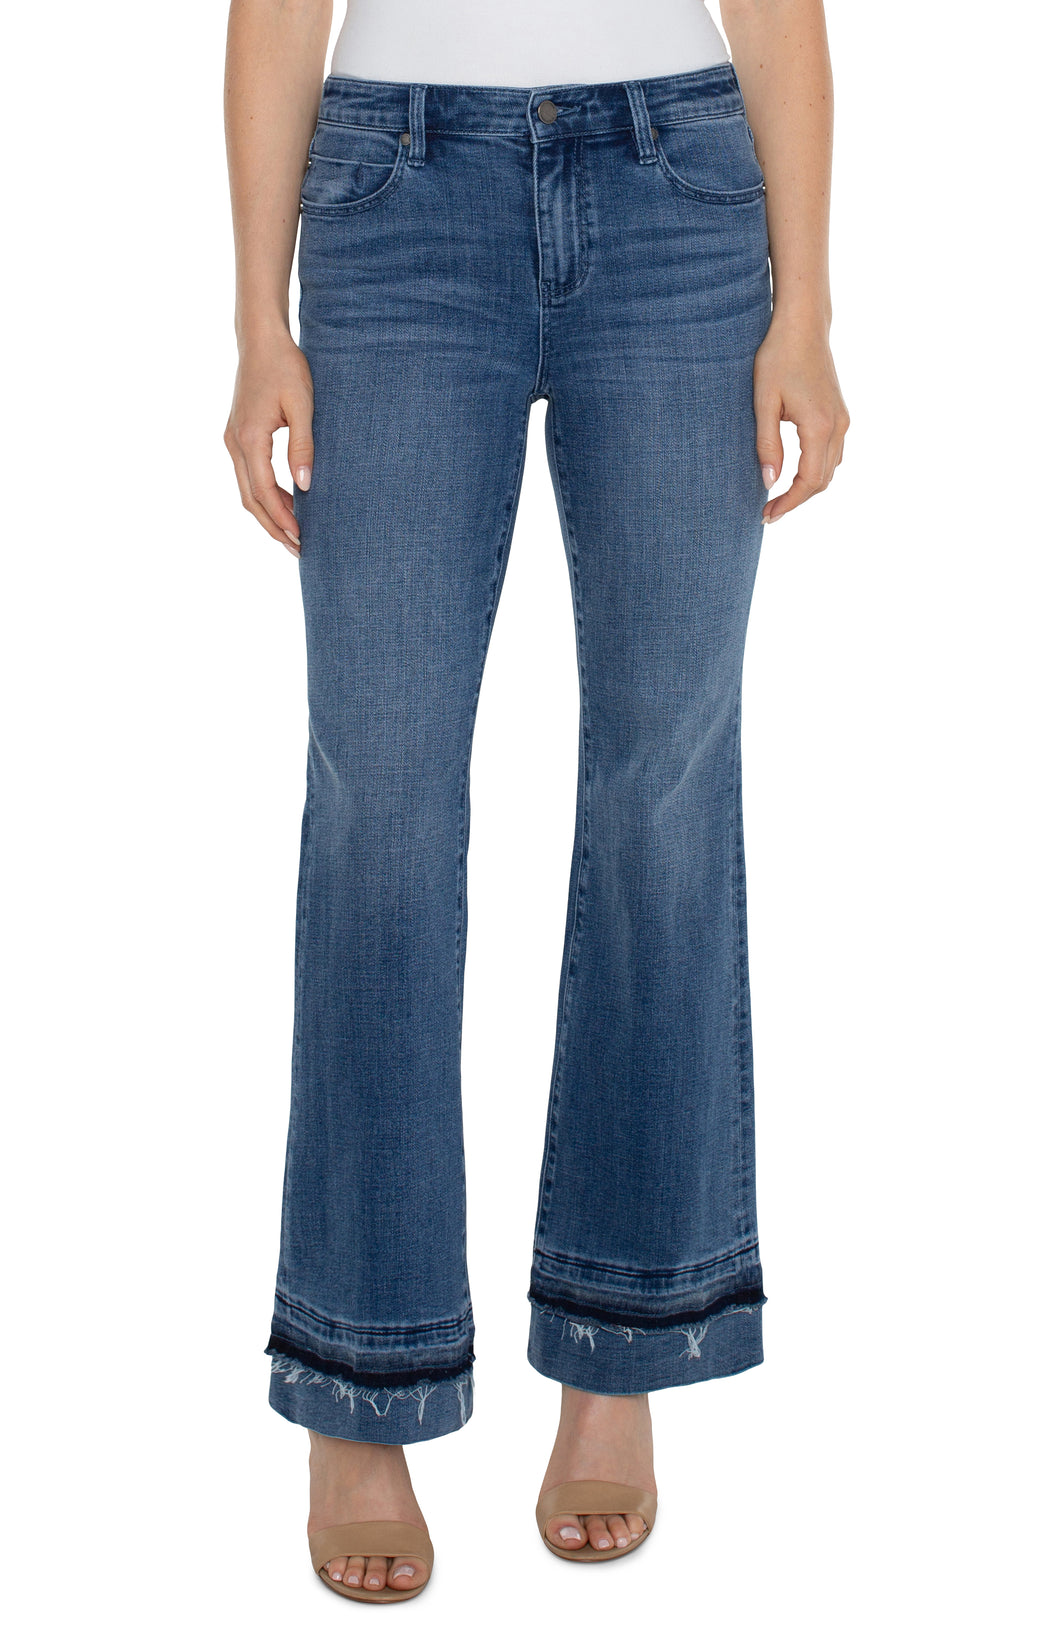 The Lucy Bootcut in Vandever features a let-down hem to give you vintage qualities while still keeping comfort in mind. Slim through the hips and thighs, this slimming denim releases at the knee and leg opening to create the beautiful bootcut shape. Everyone loves Lucy...   Color- Vandever. 32